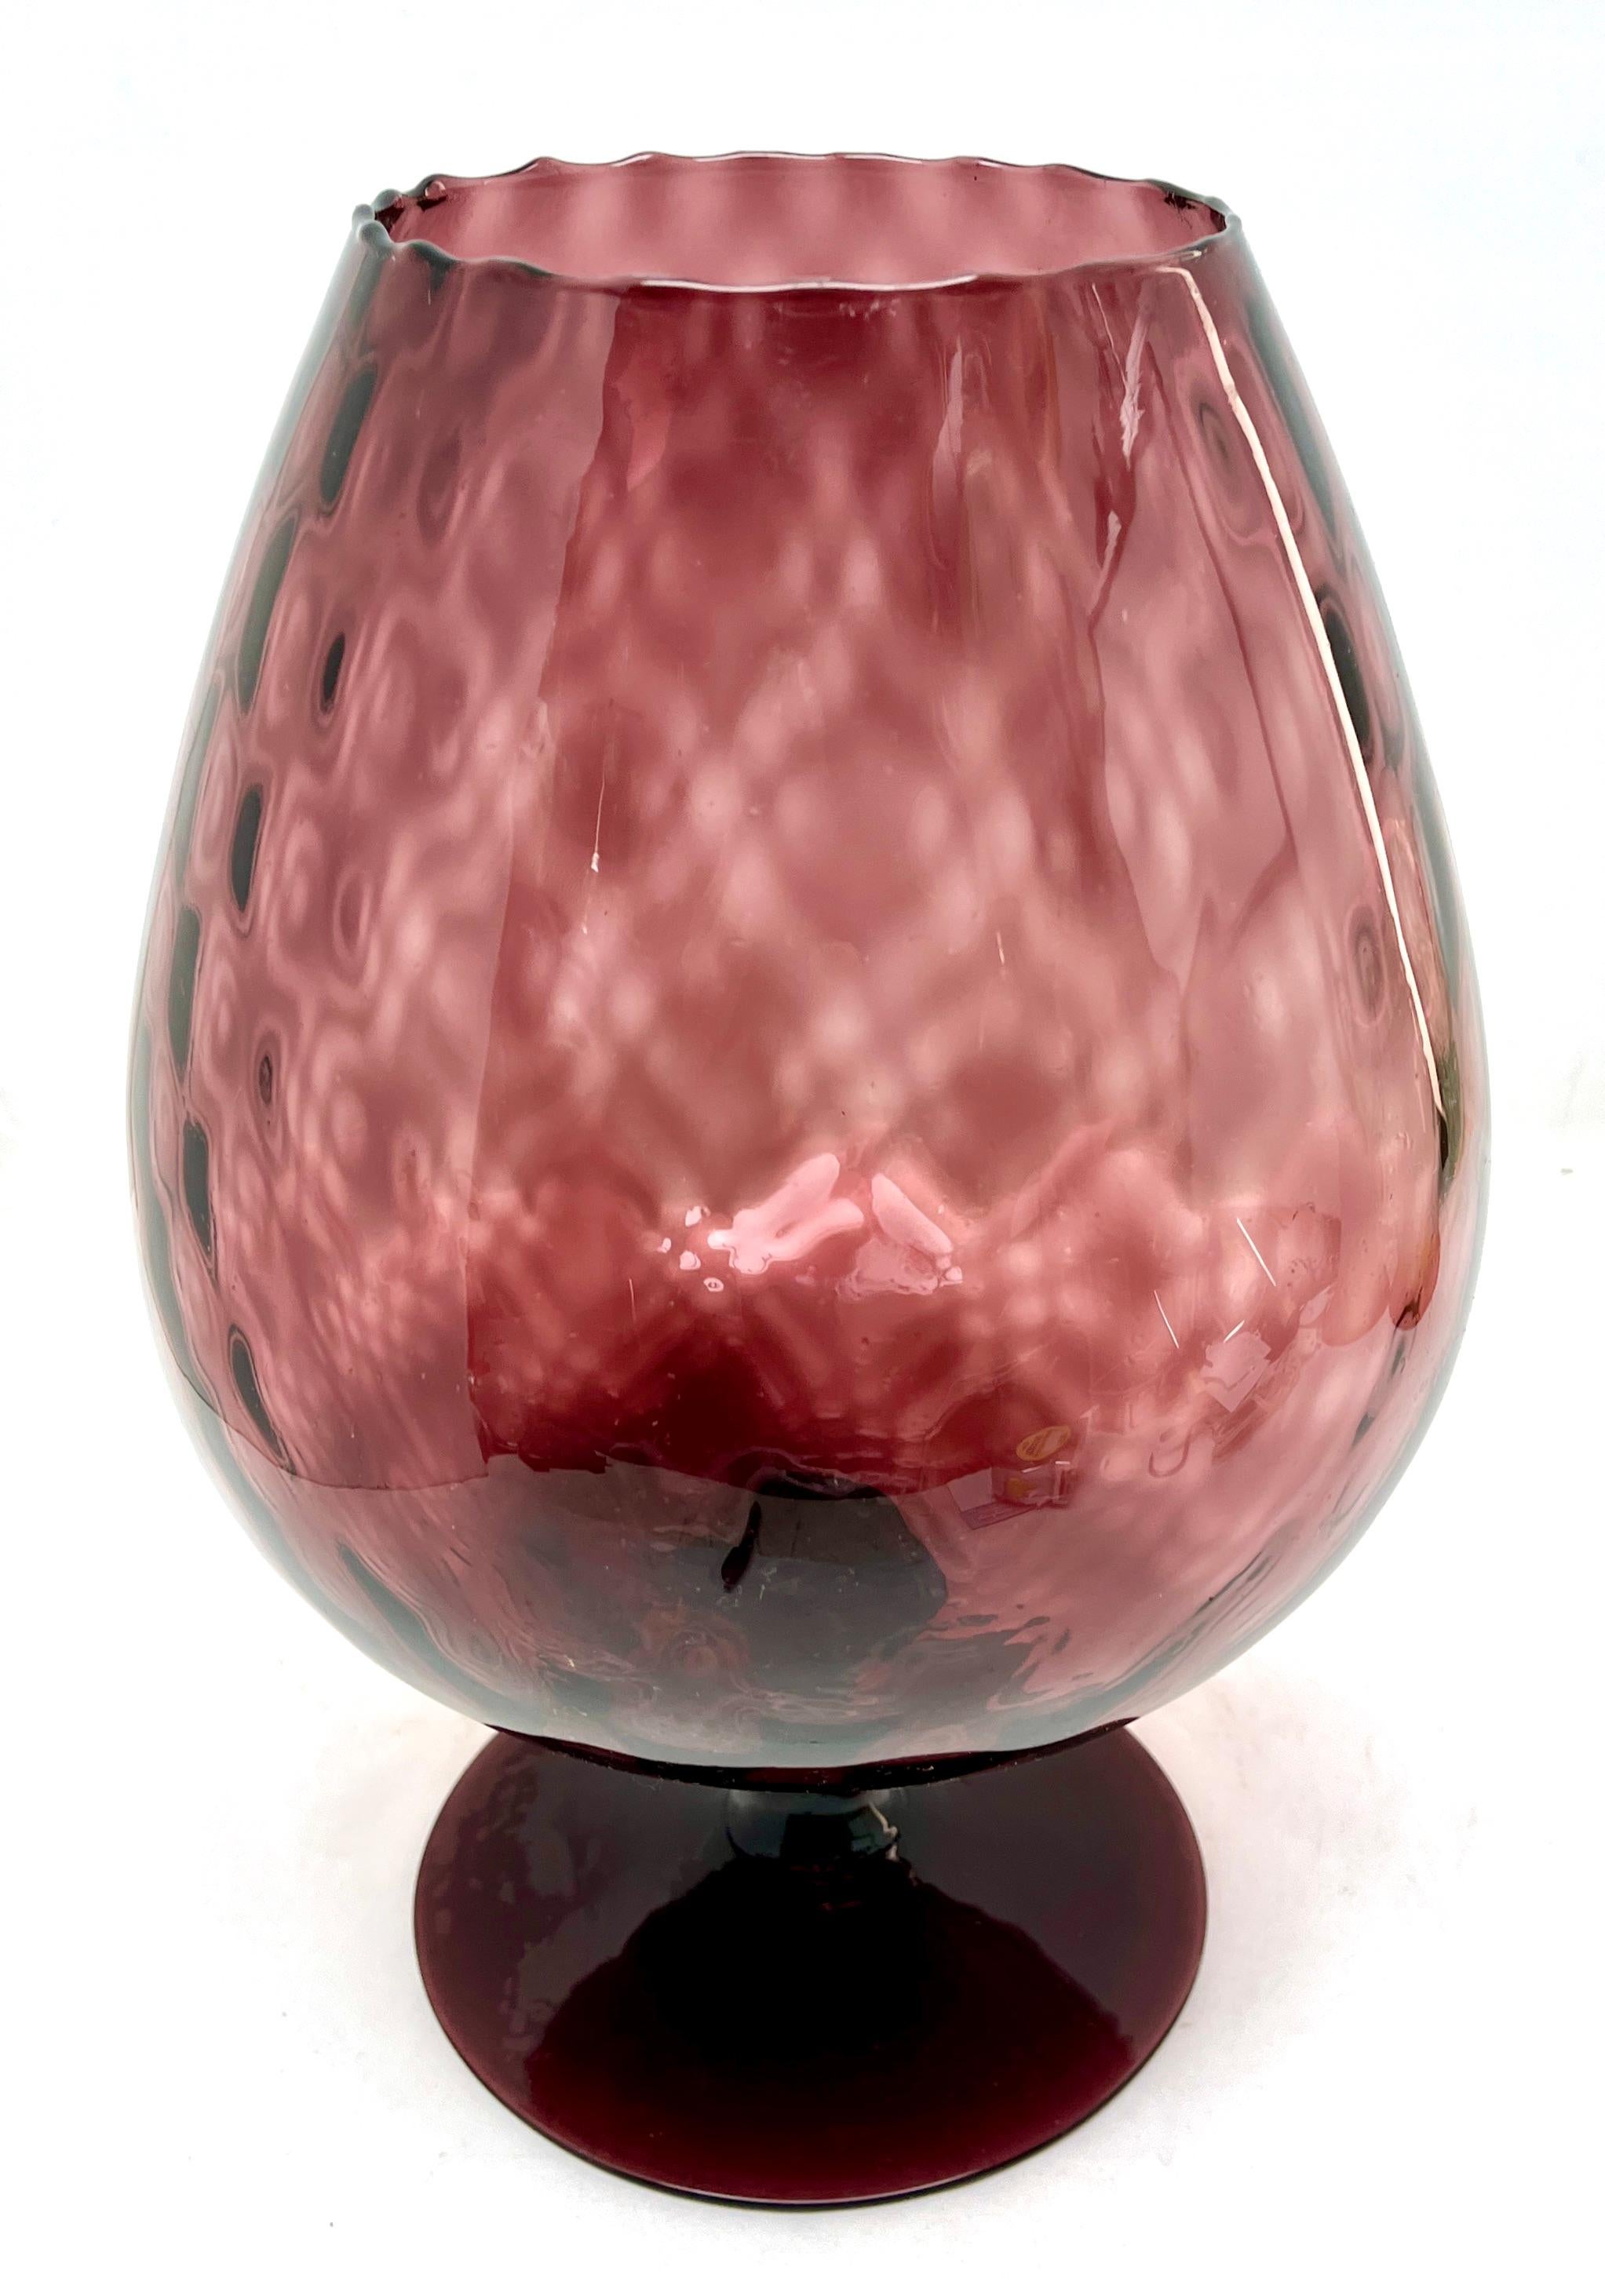 Mid-Century Modern Vintage Red Opalescent Italian Opaline Vase on Foot from Florence, 1960s For Sale